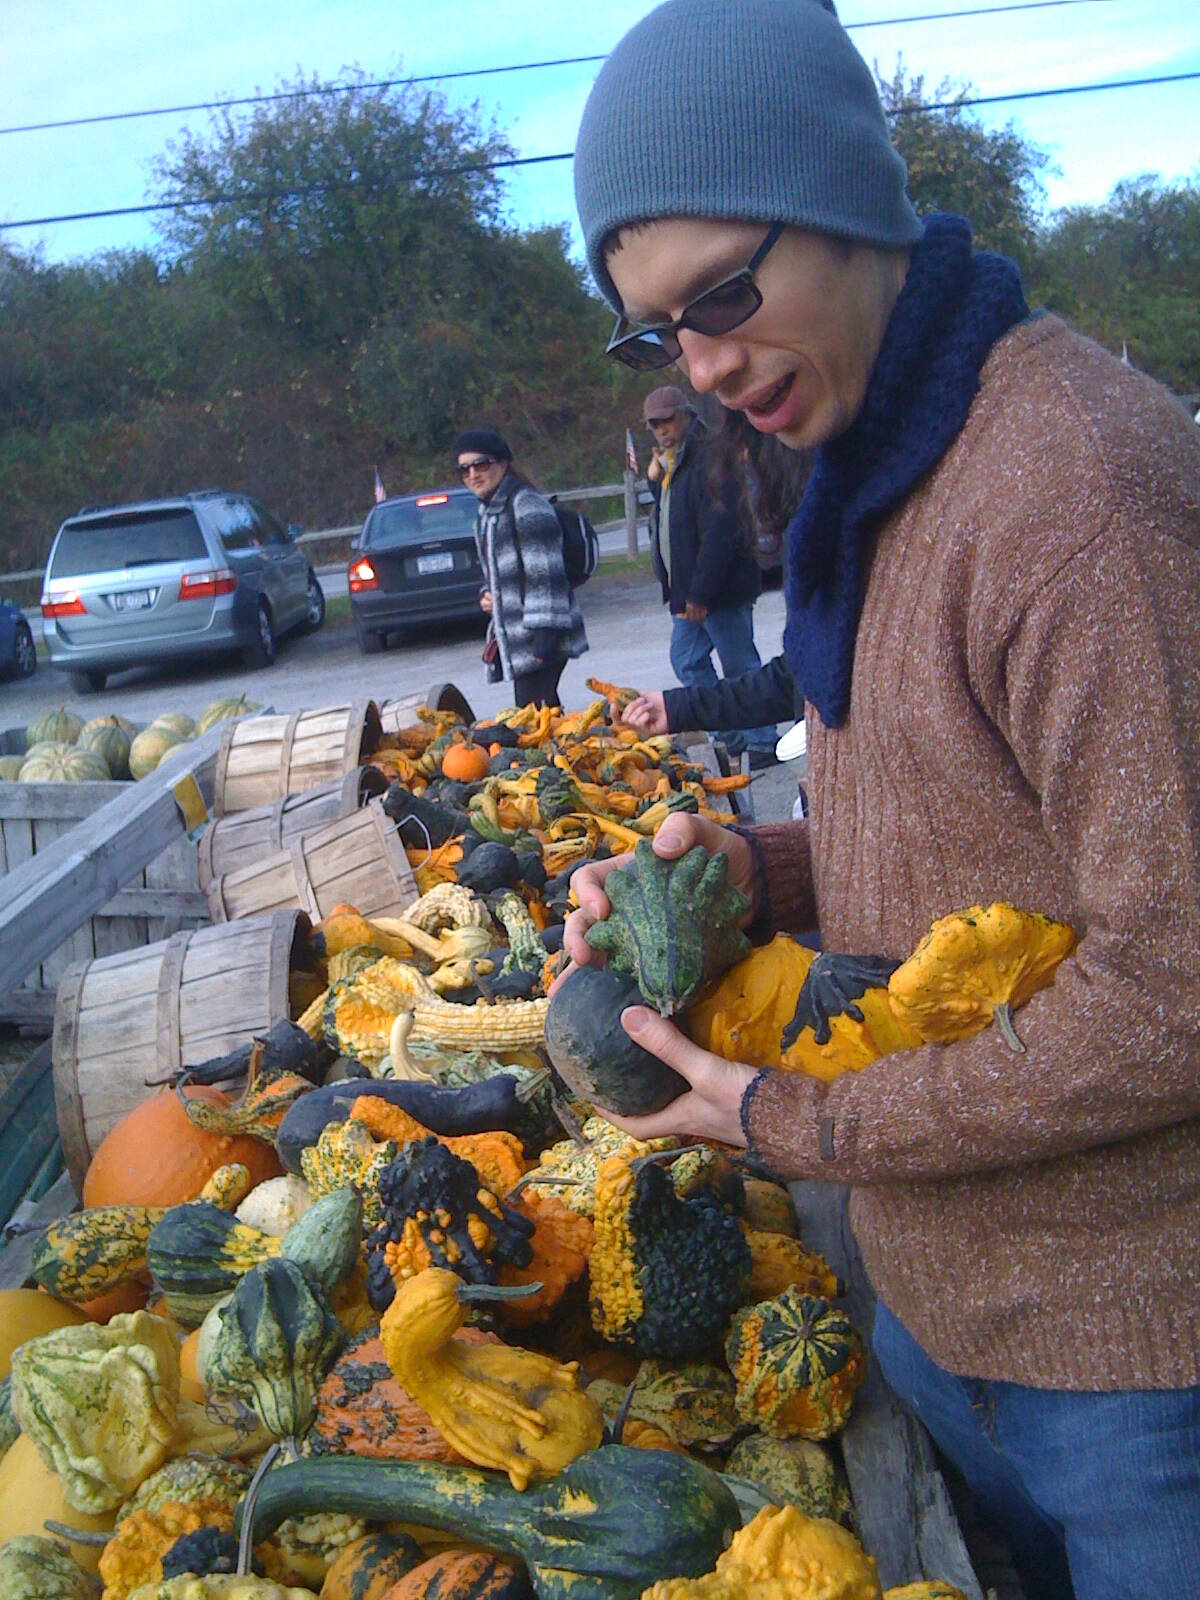 jesse checking out the gourds